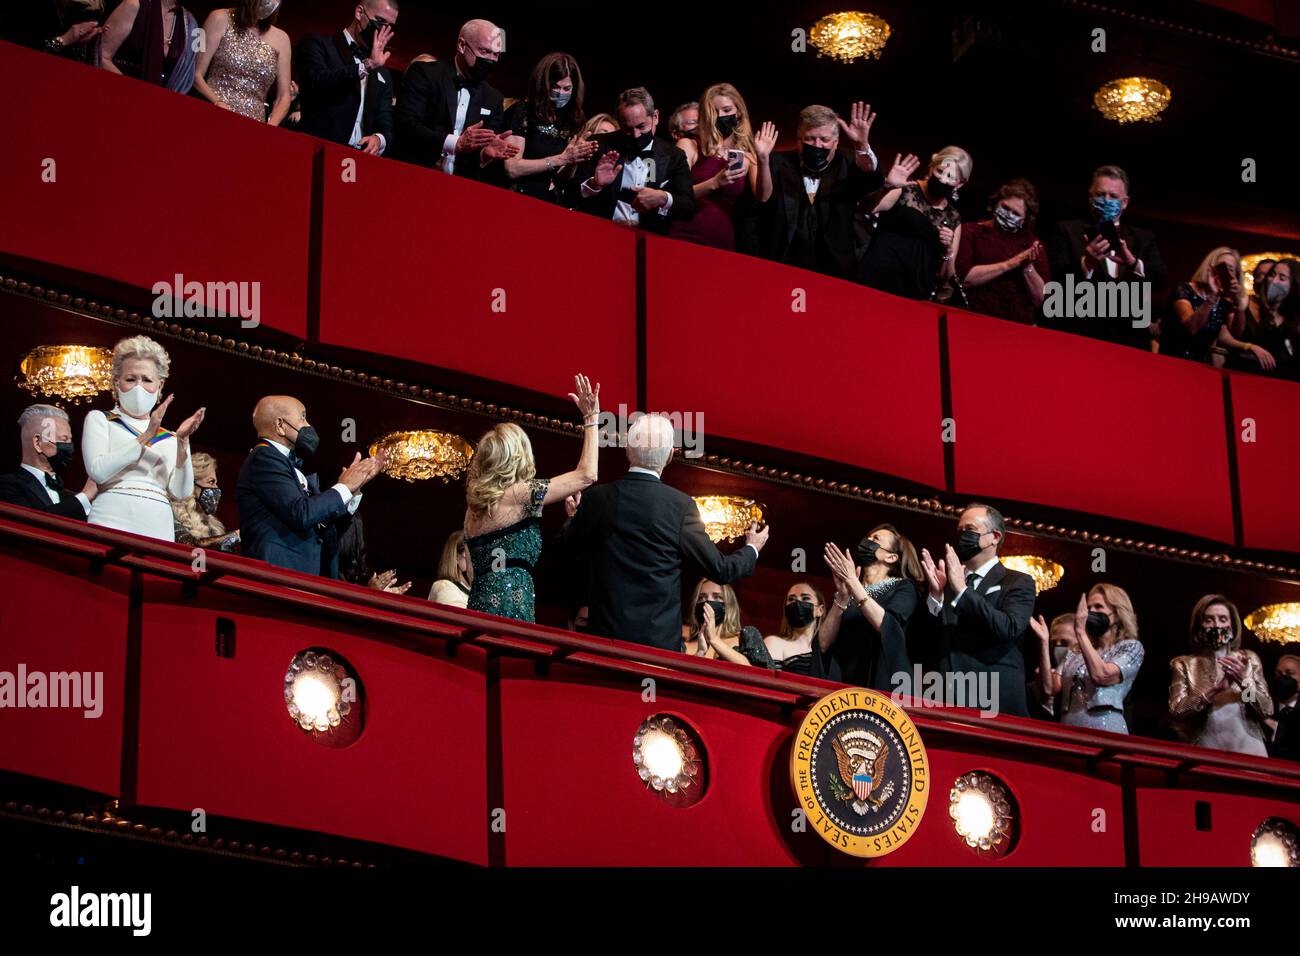 U.S. President Joe Biden, U.S. First Lady Jill Biden, U.S. Vice President Kamala Harris, and Second Gentleman Douglas Emhoff arrive during the 44th Kennedy Center Honors at the John F. Kennedy Center for the Performing Arts in Washington, DC, U.S., on Sunday, Dec. 5, 2021. The 44th Honorees for lifetime artistic achievements include operatic bass-baritone Justino Diaz, Motown founder Berry Gordy, Saturday Night Live creator Lorne Michaels, actress Bette Midler, and singer-songwriter Joni Mitchell. Credit: Al Drago/Pool via CNP /MediaPunch Stock Photo